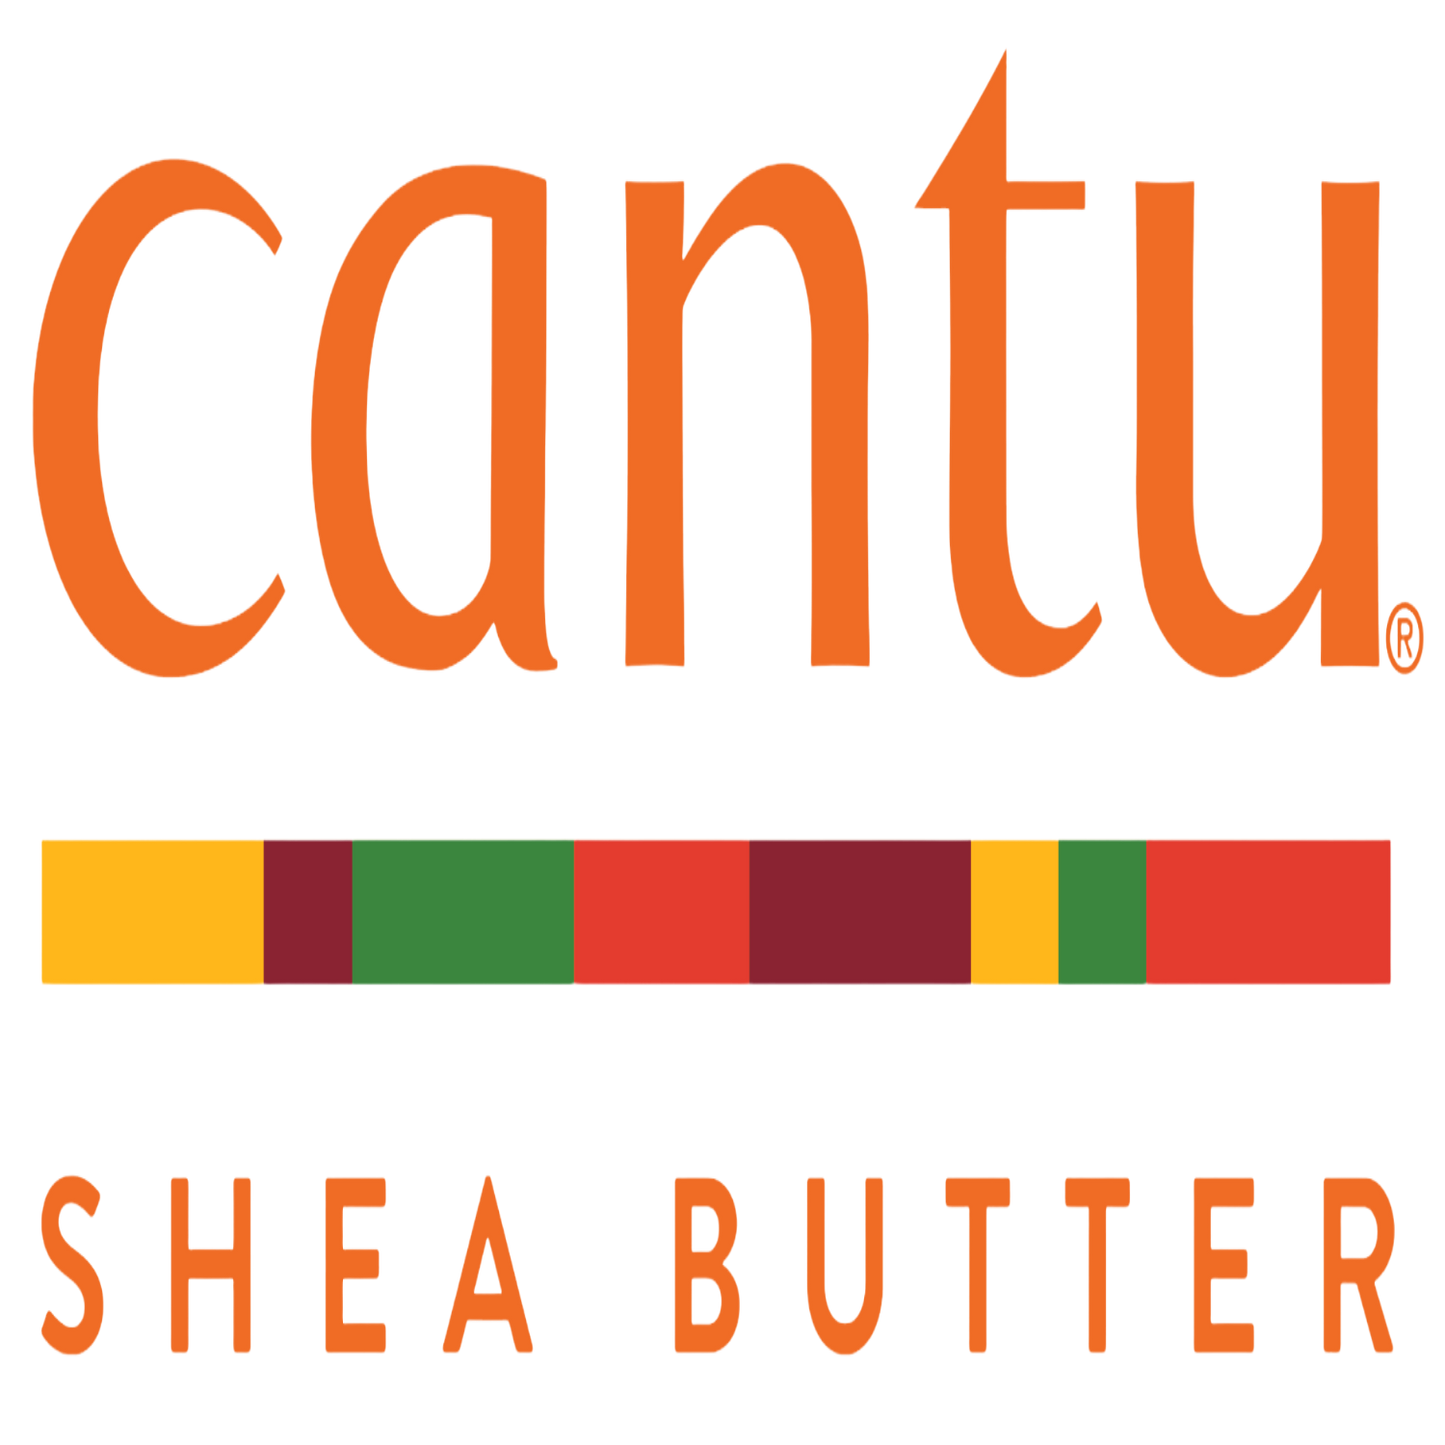 CANTU FOR NATURAL HAIR CONDITIONING CREAMY HAIR LOTION 12oz